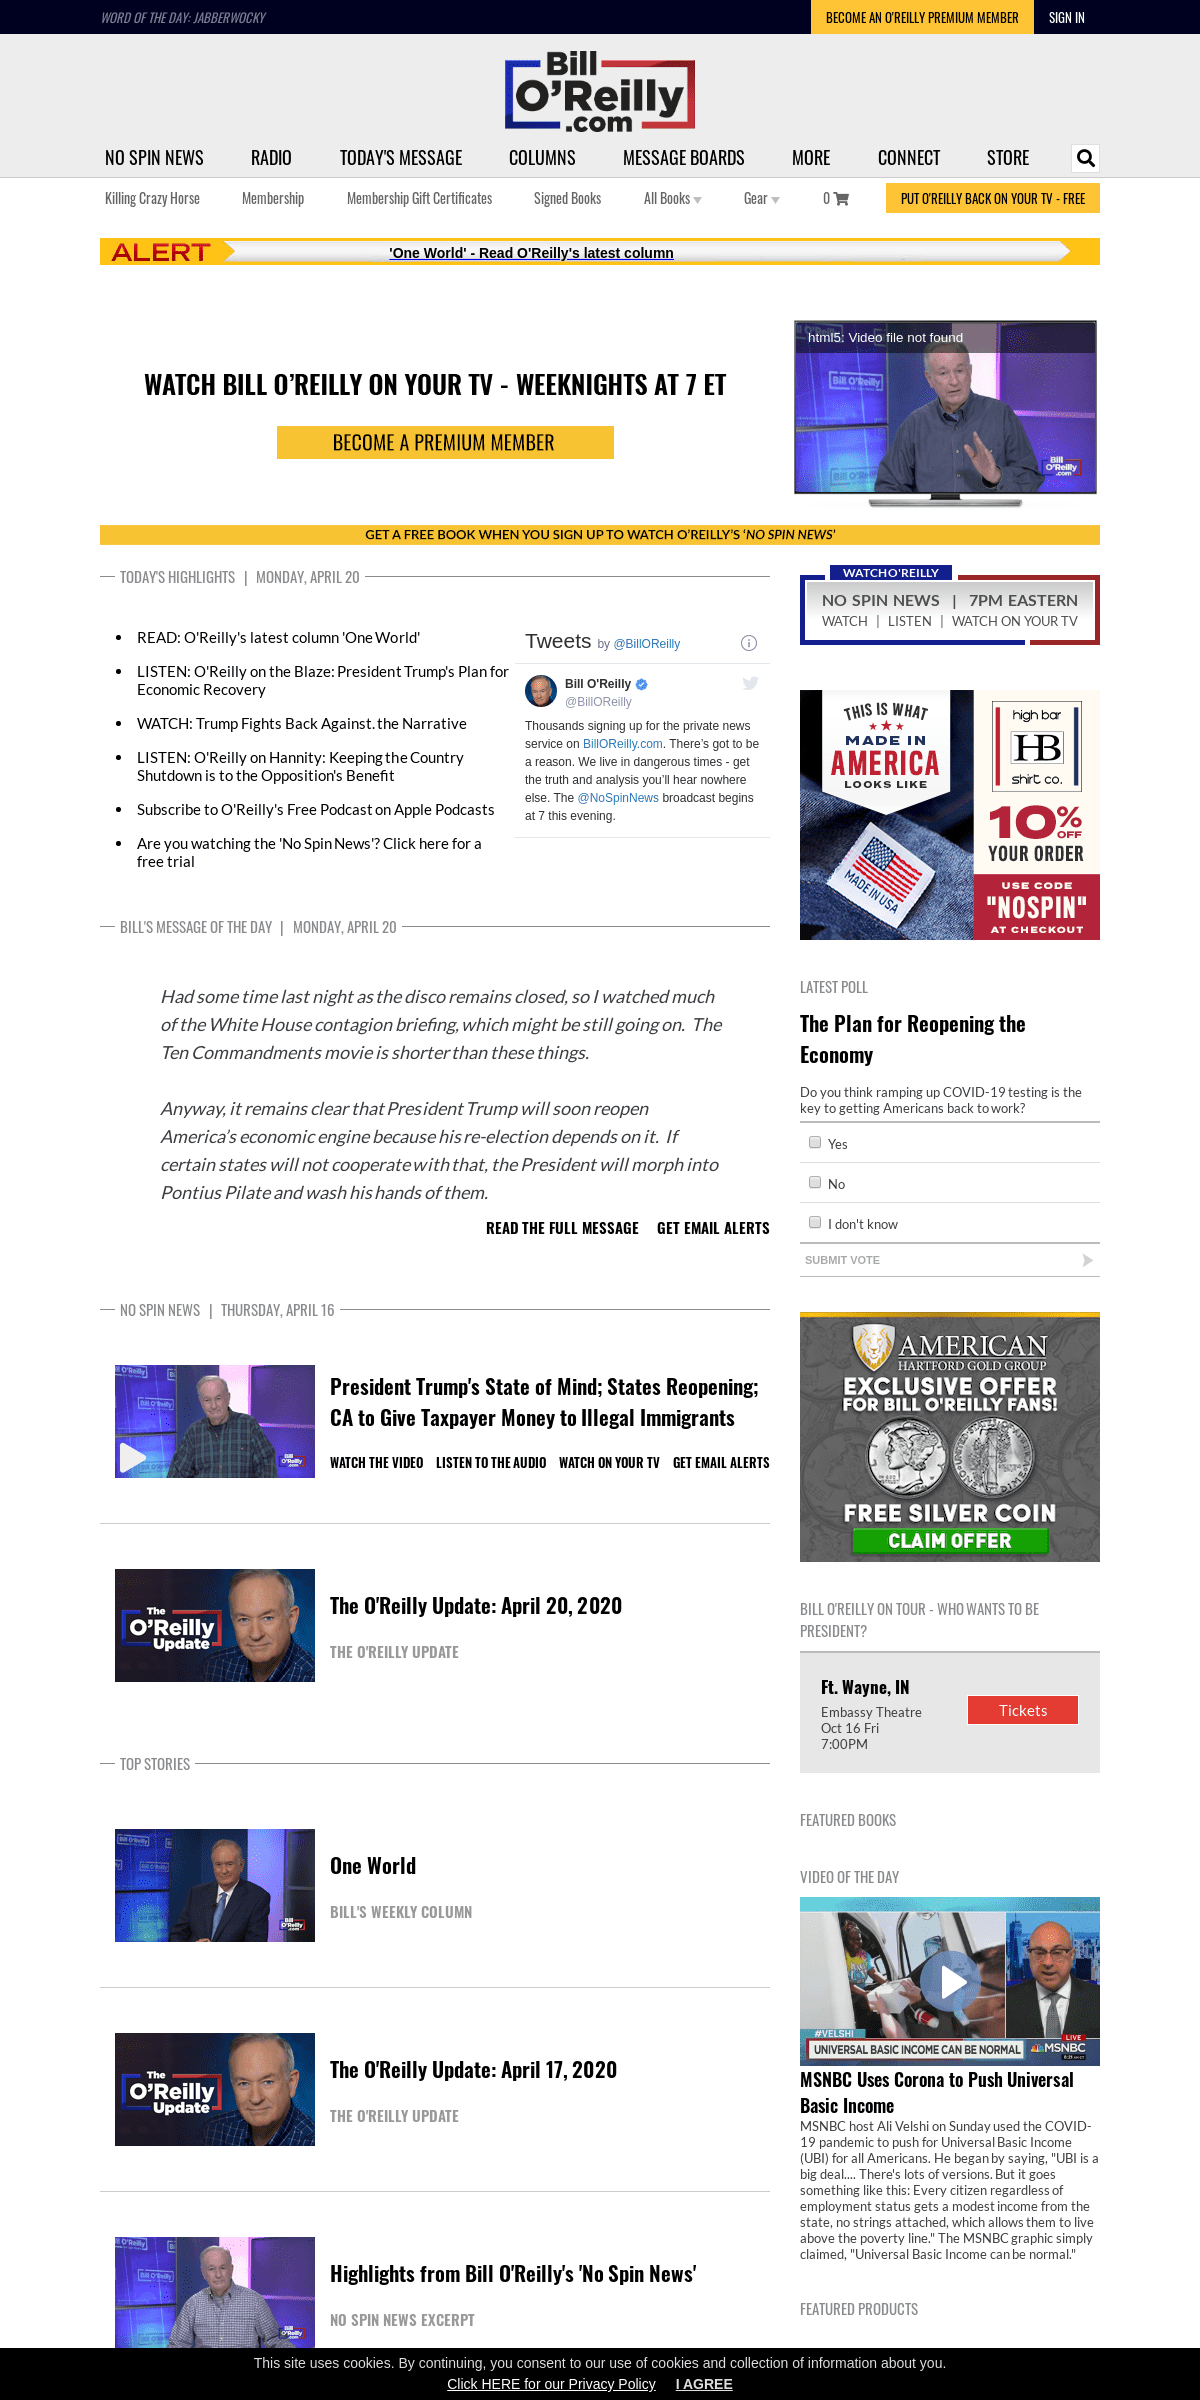 A complete backup of billoreilly.com